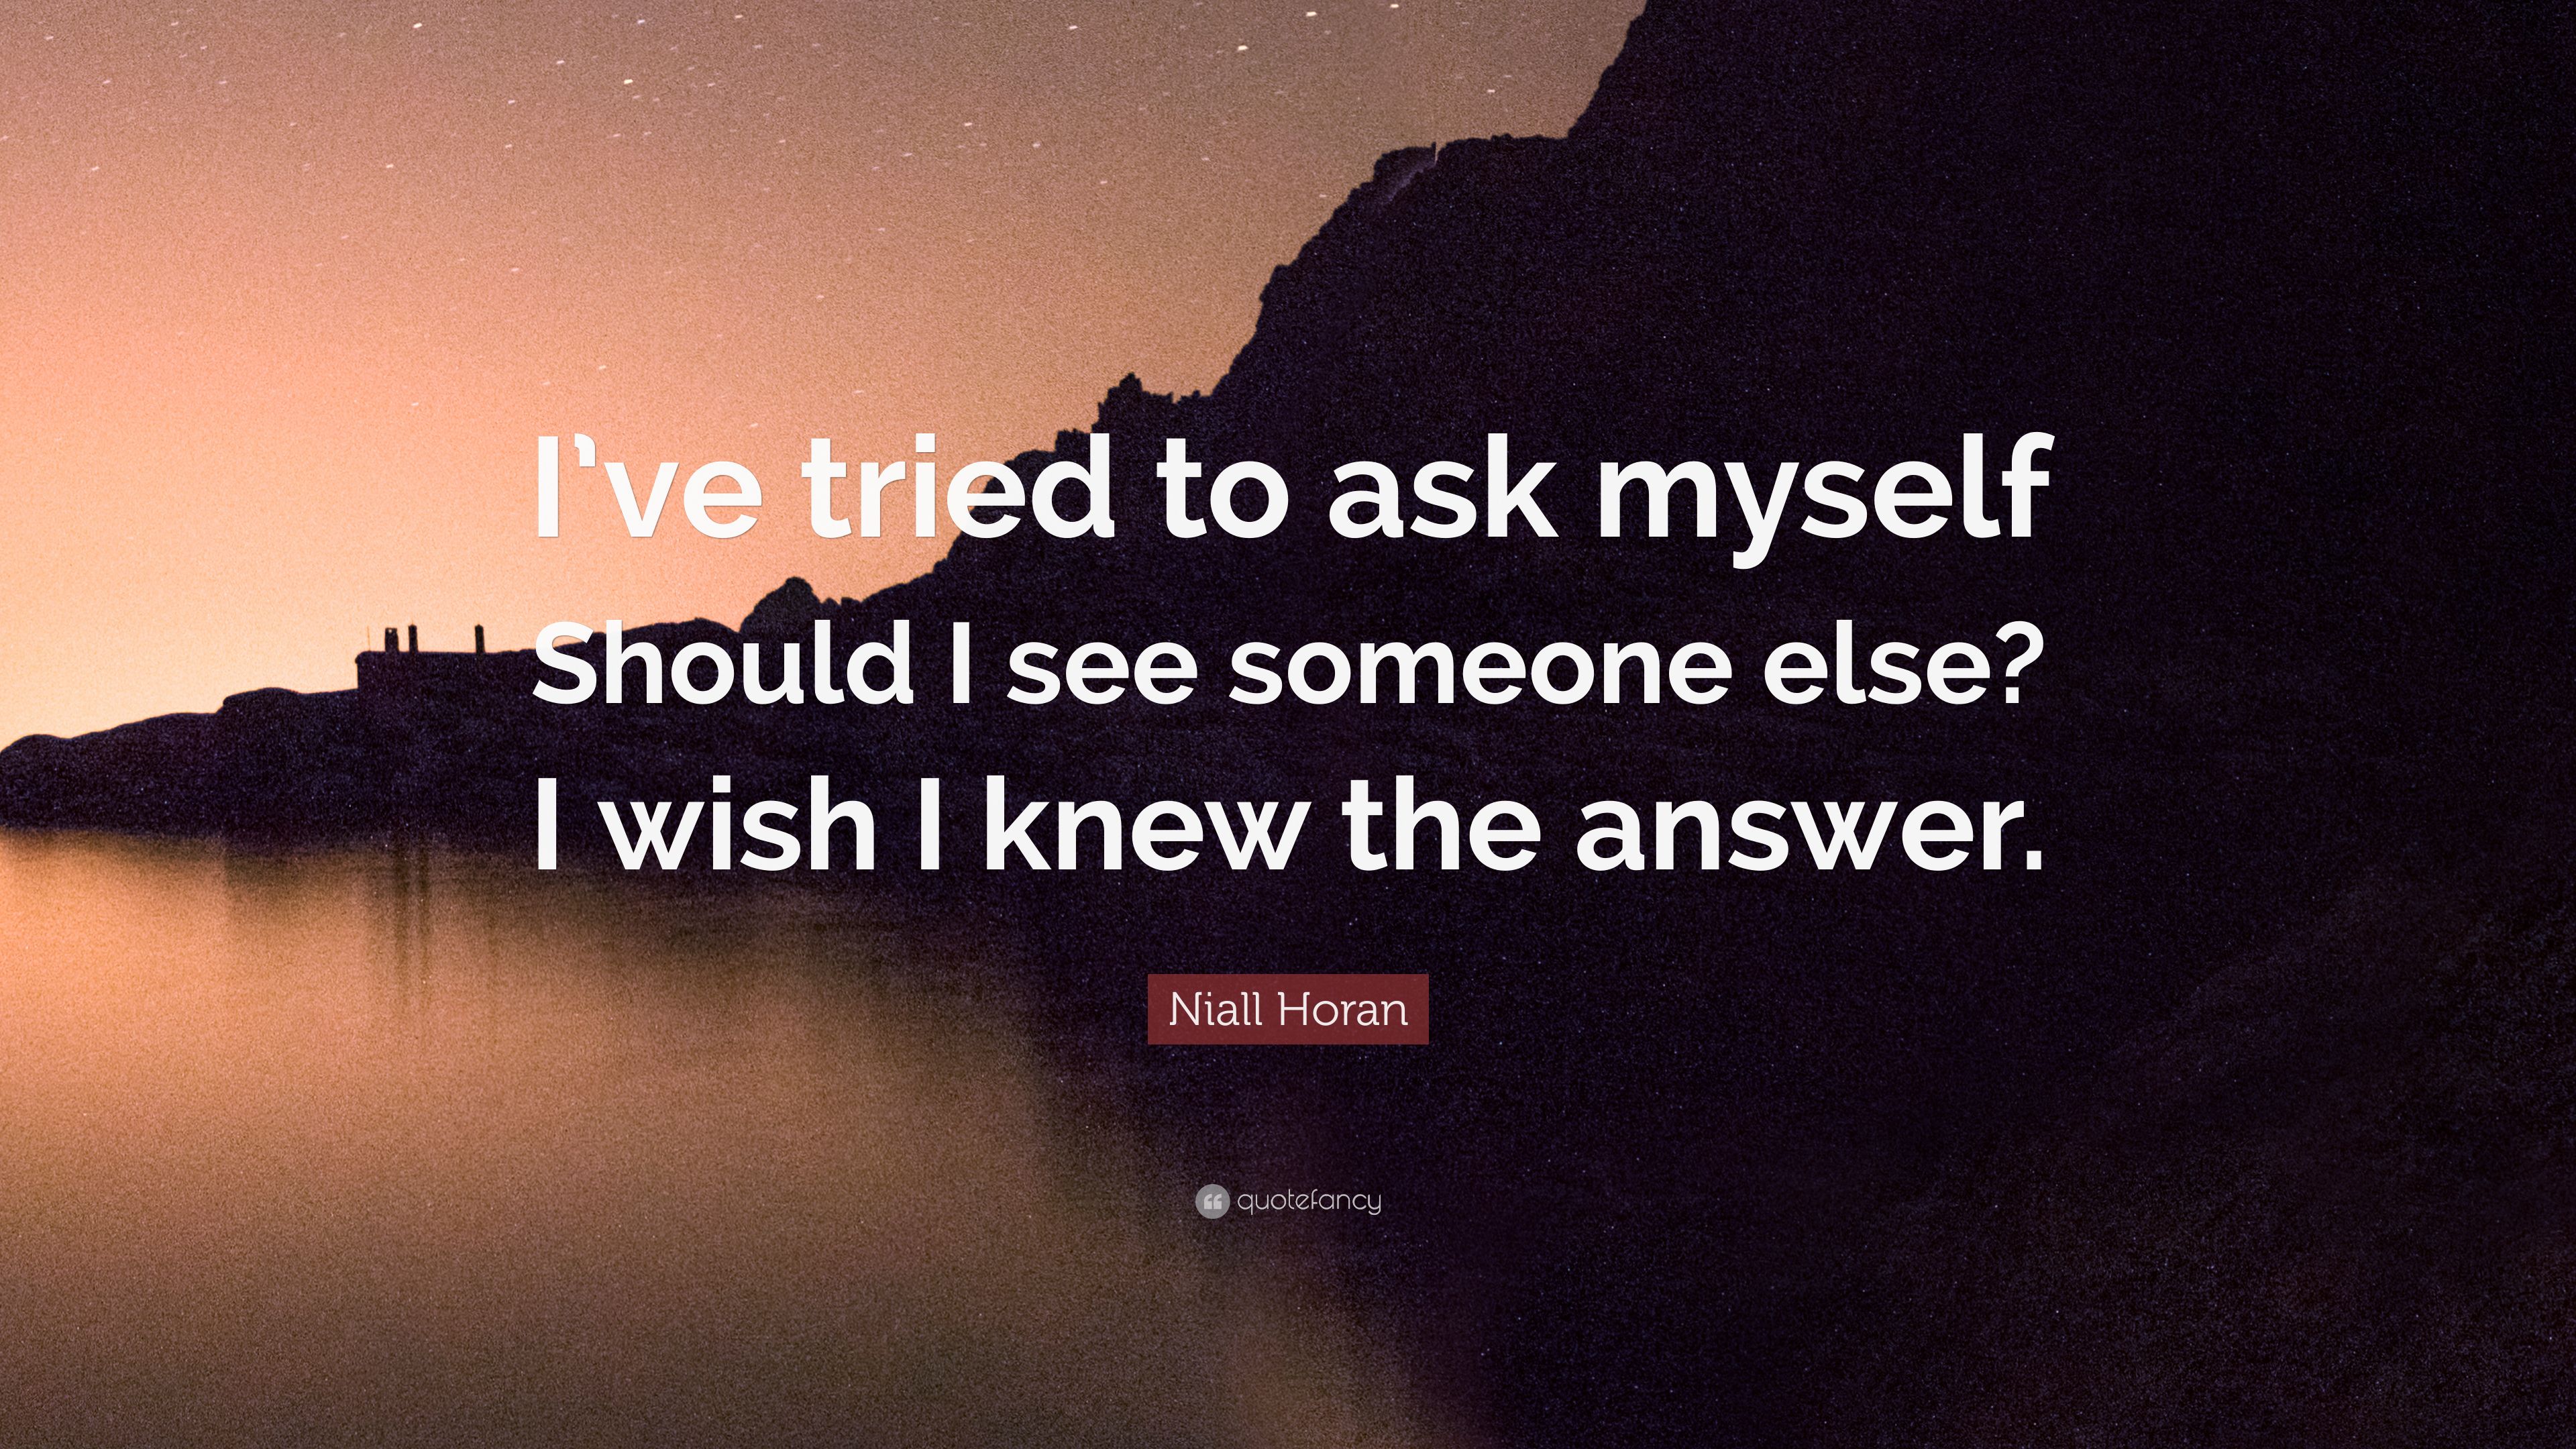 Niall Horan Quote: “I've tried to ask myself Should I see someone